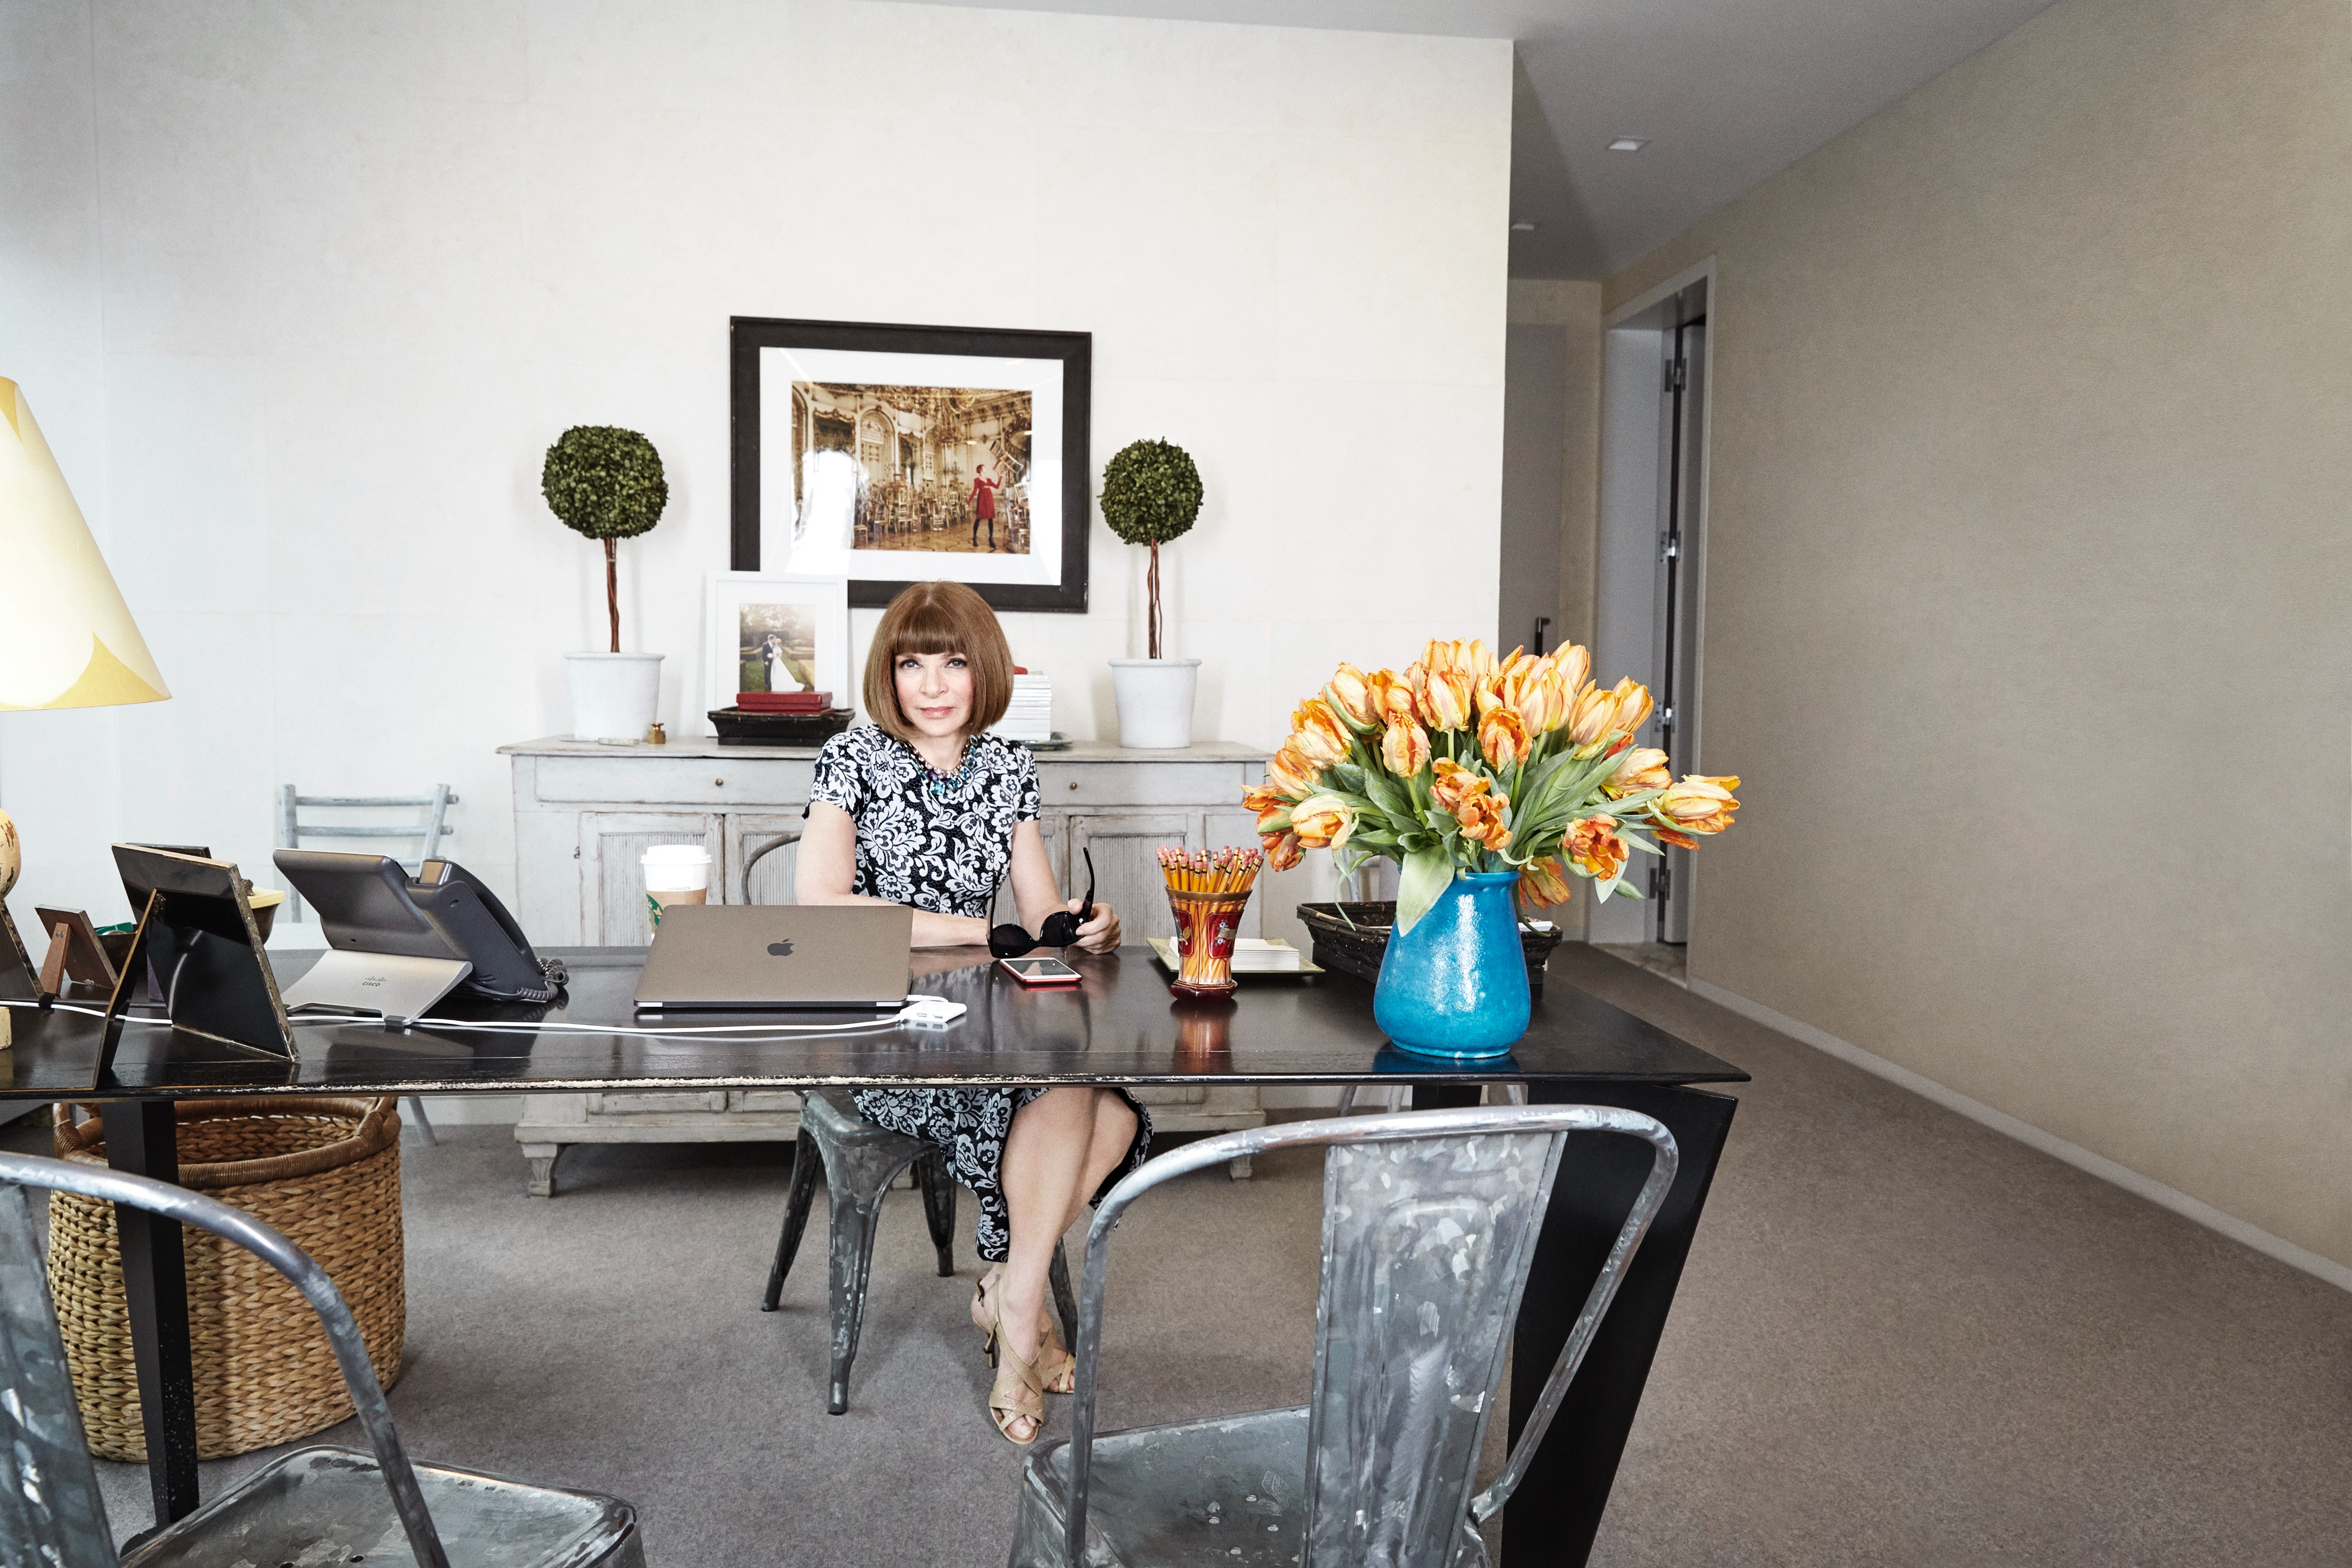 Anna Wintour on the Met Ball, the Future of Magazines and Her Own Future |  BoF